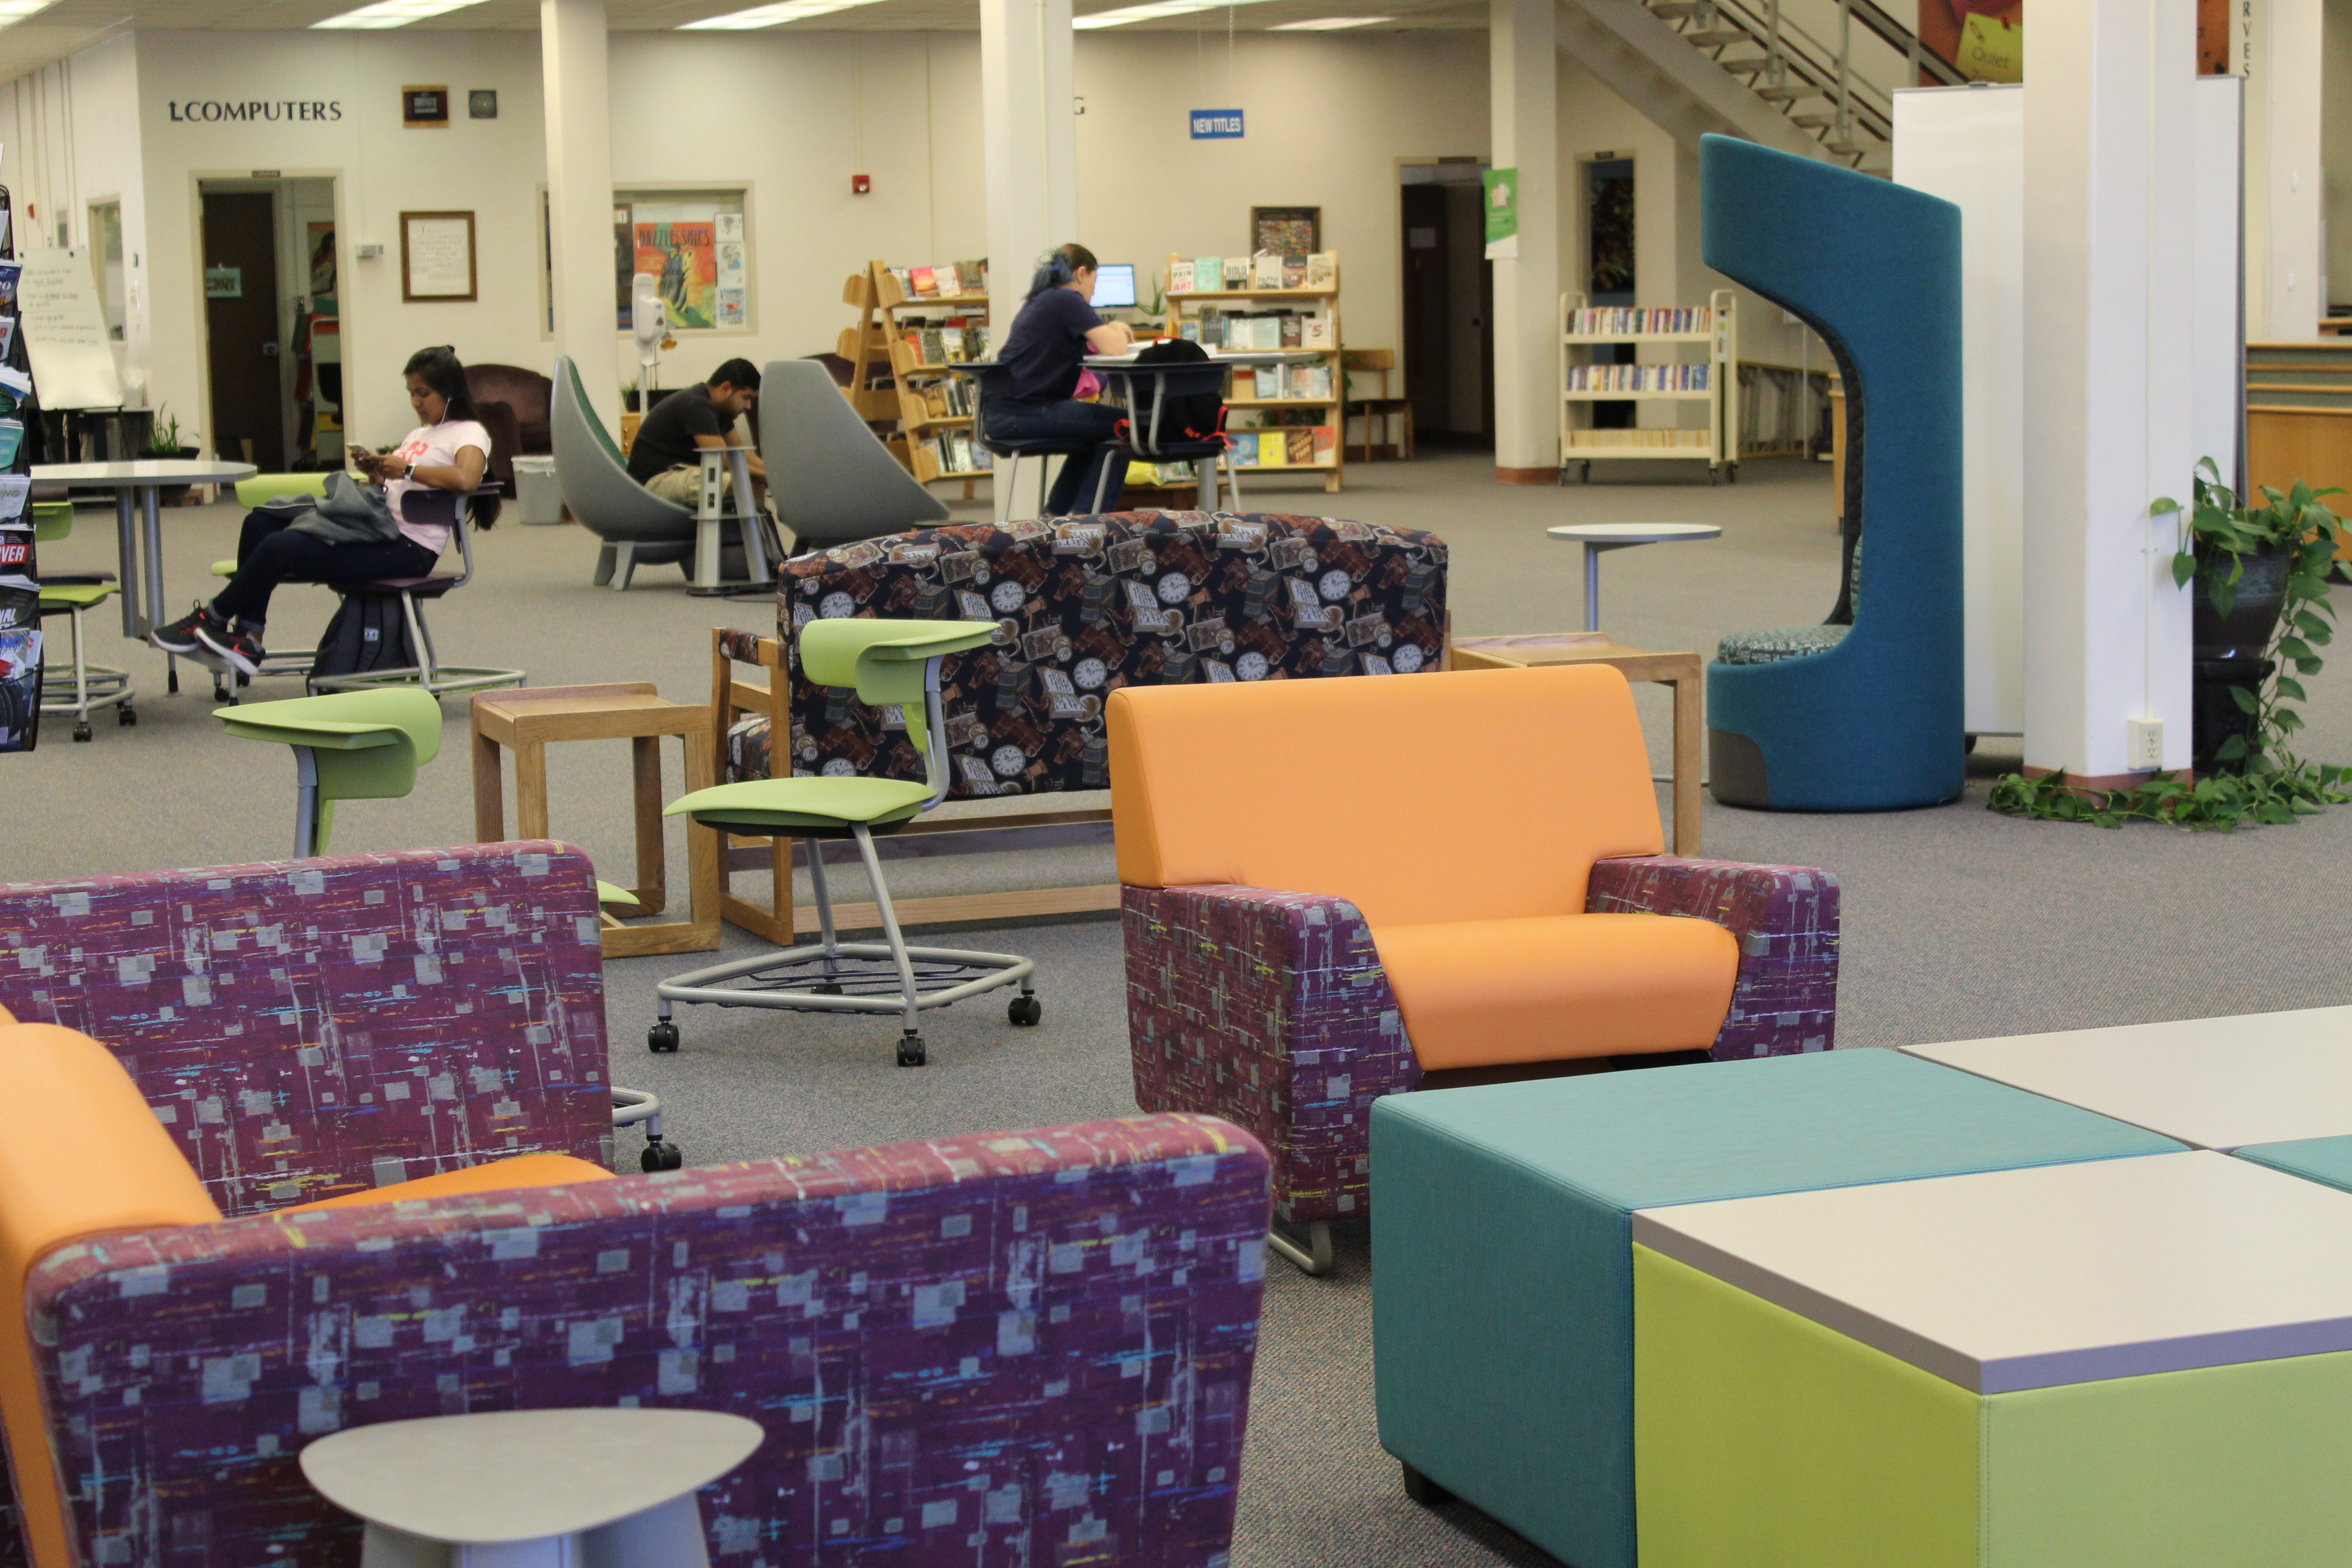 Library director hopes for increased student interest after improvements